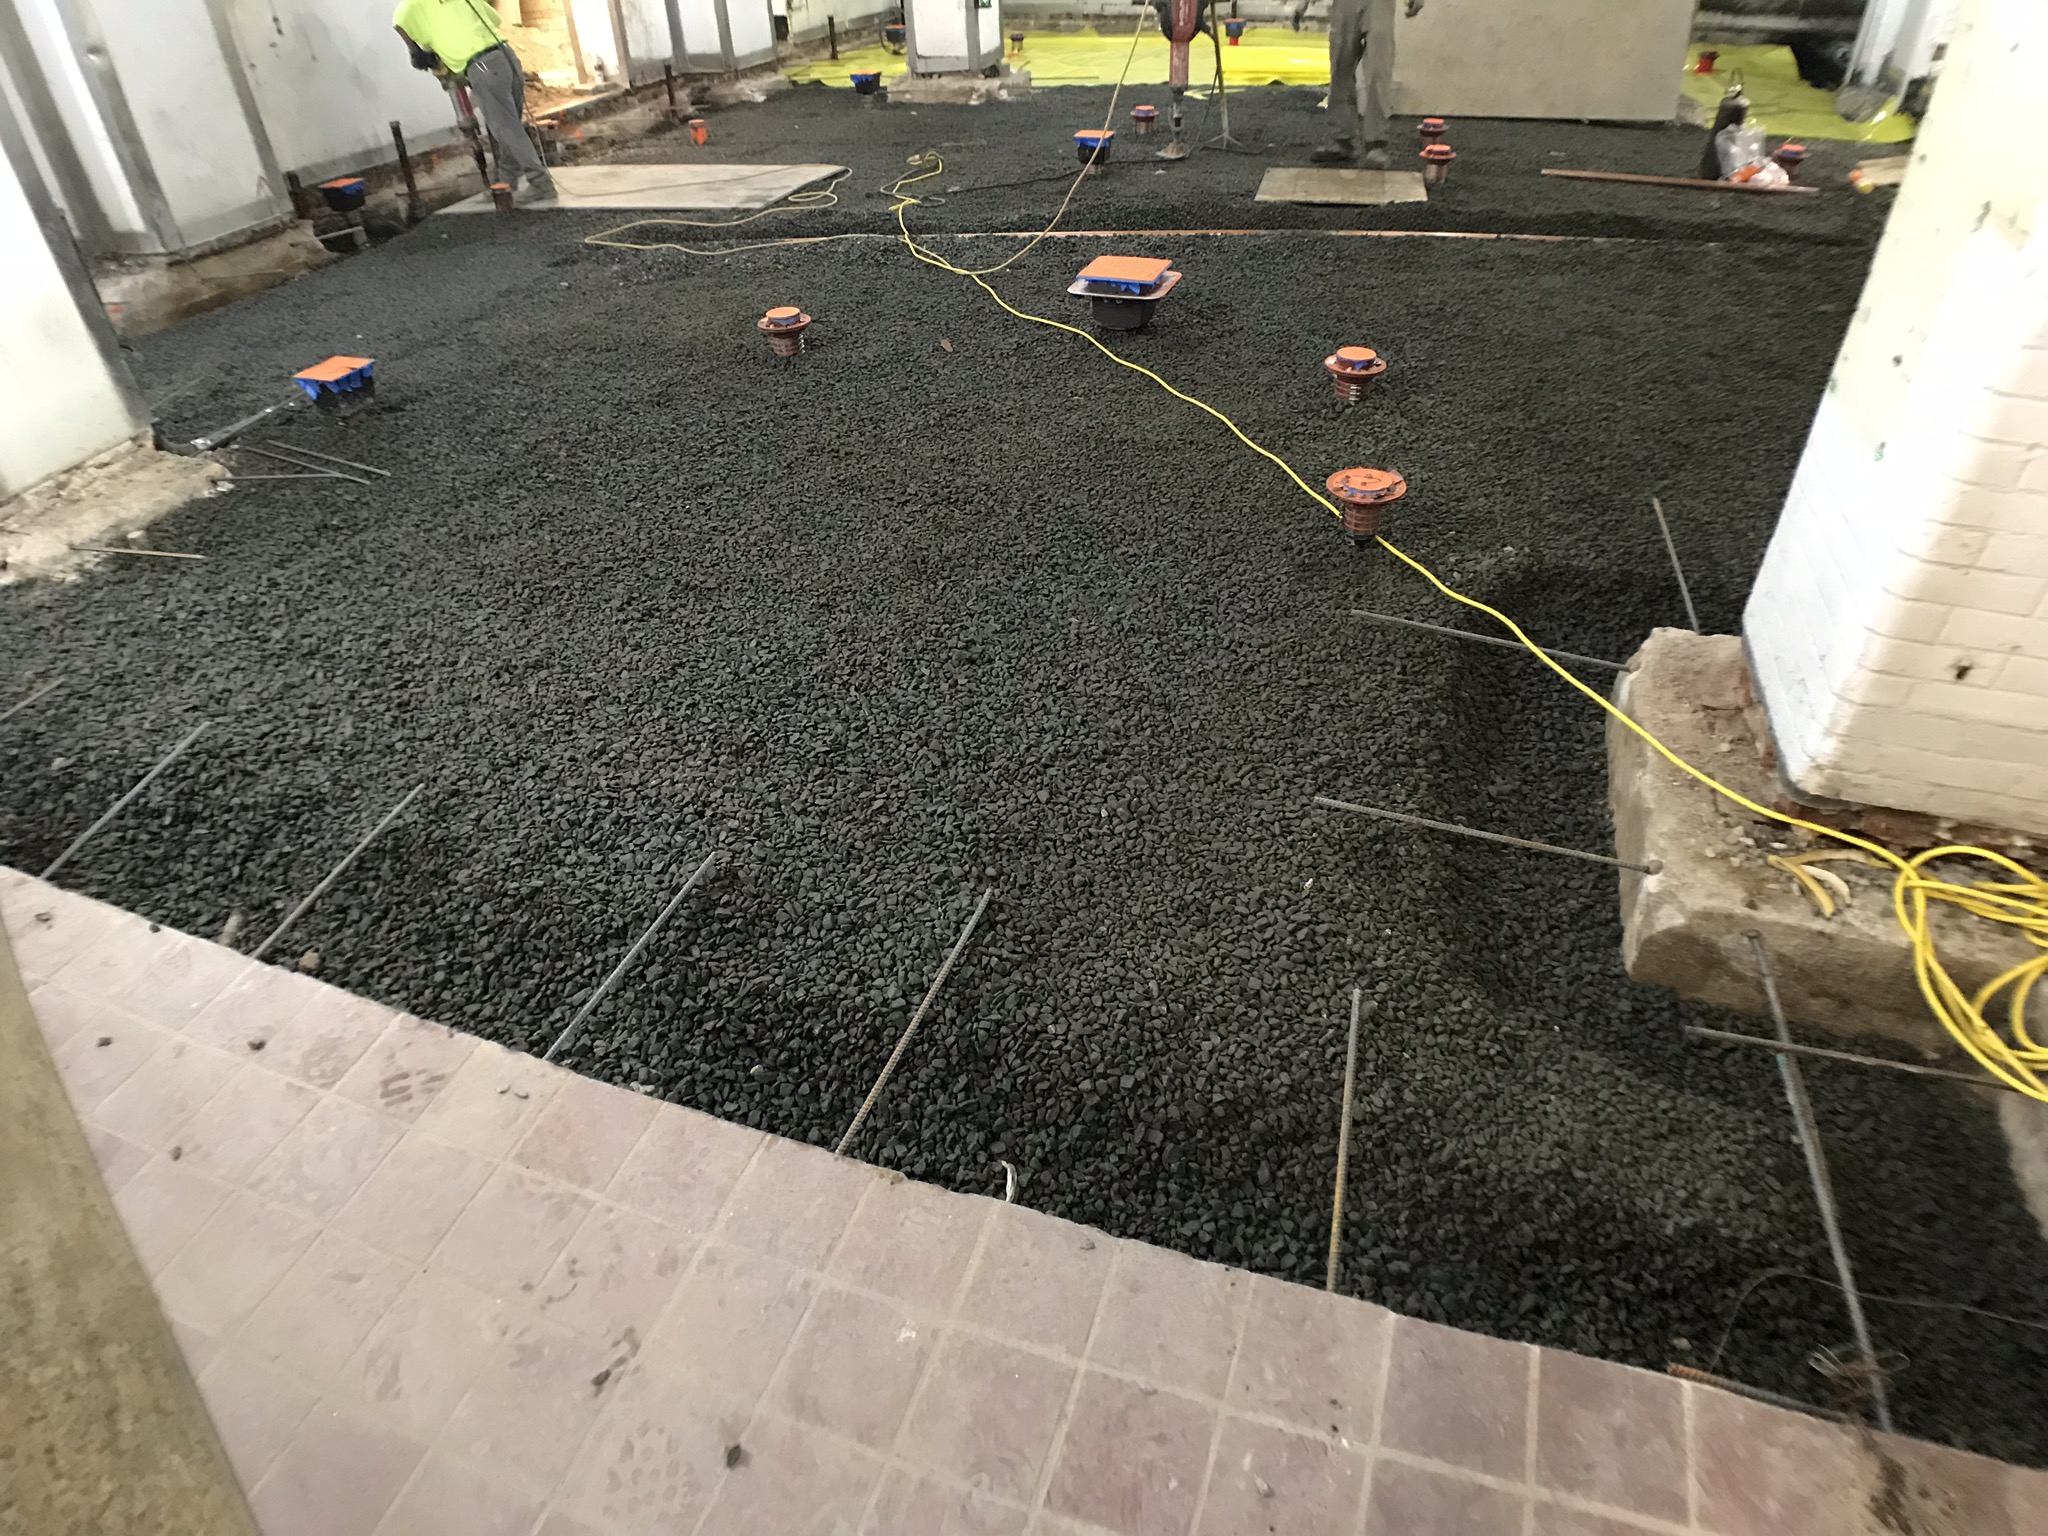 Gravel laid for The Carlyle kitchen construction project